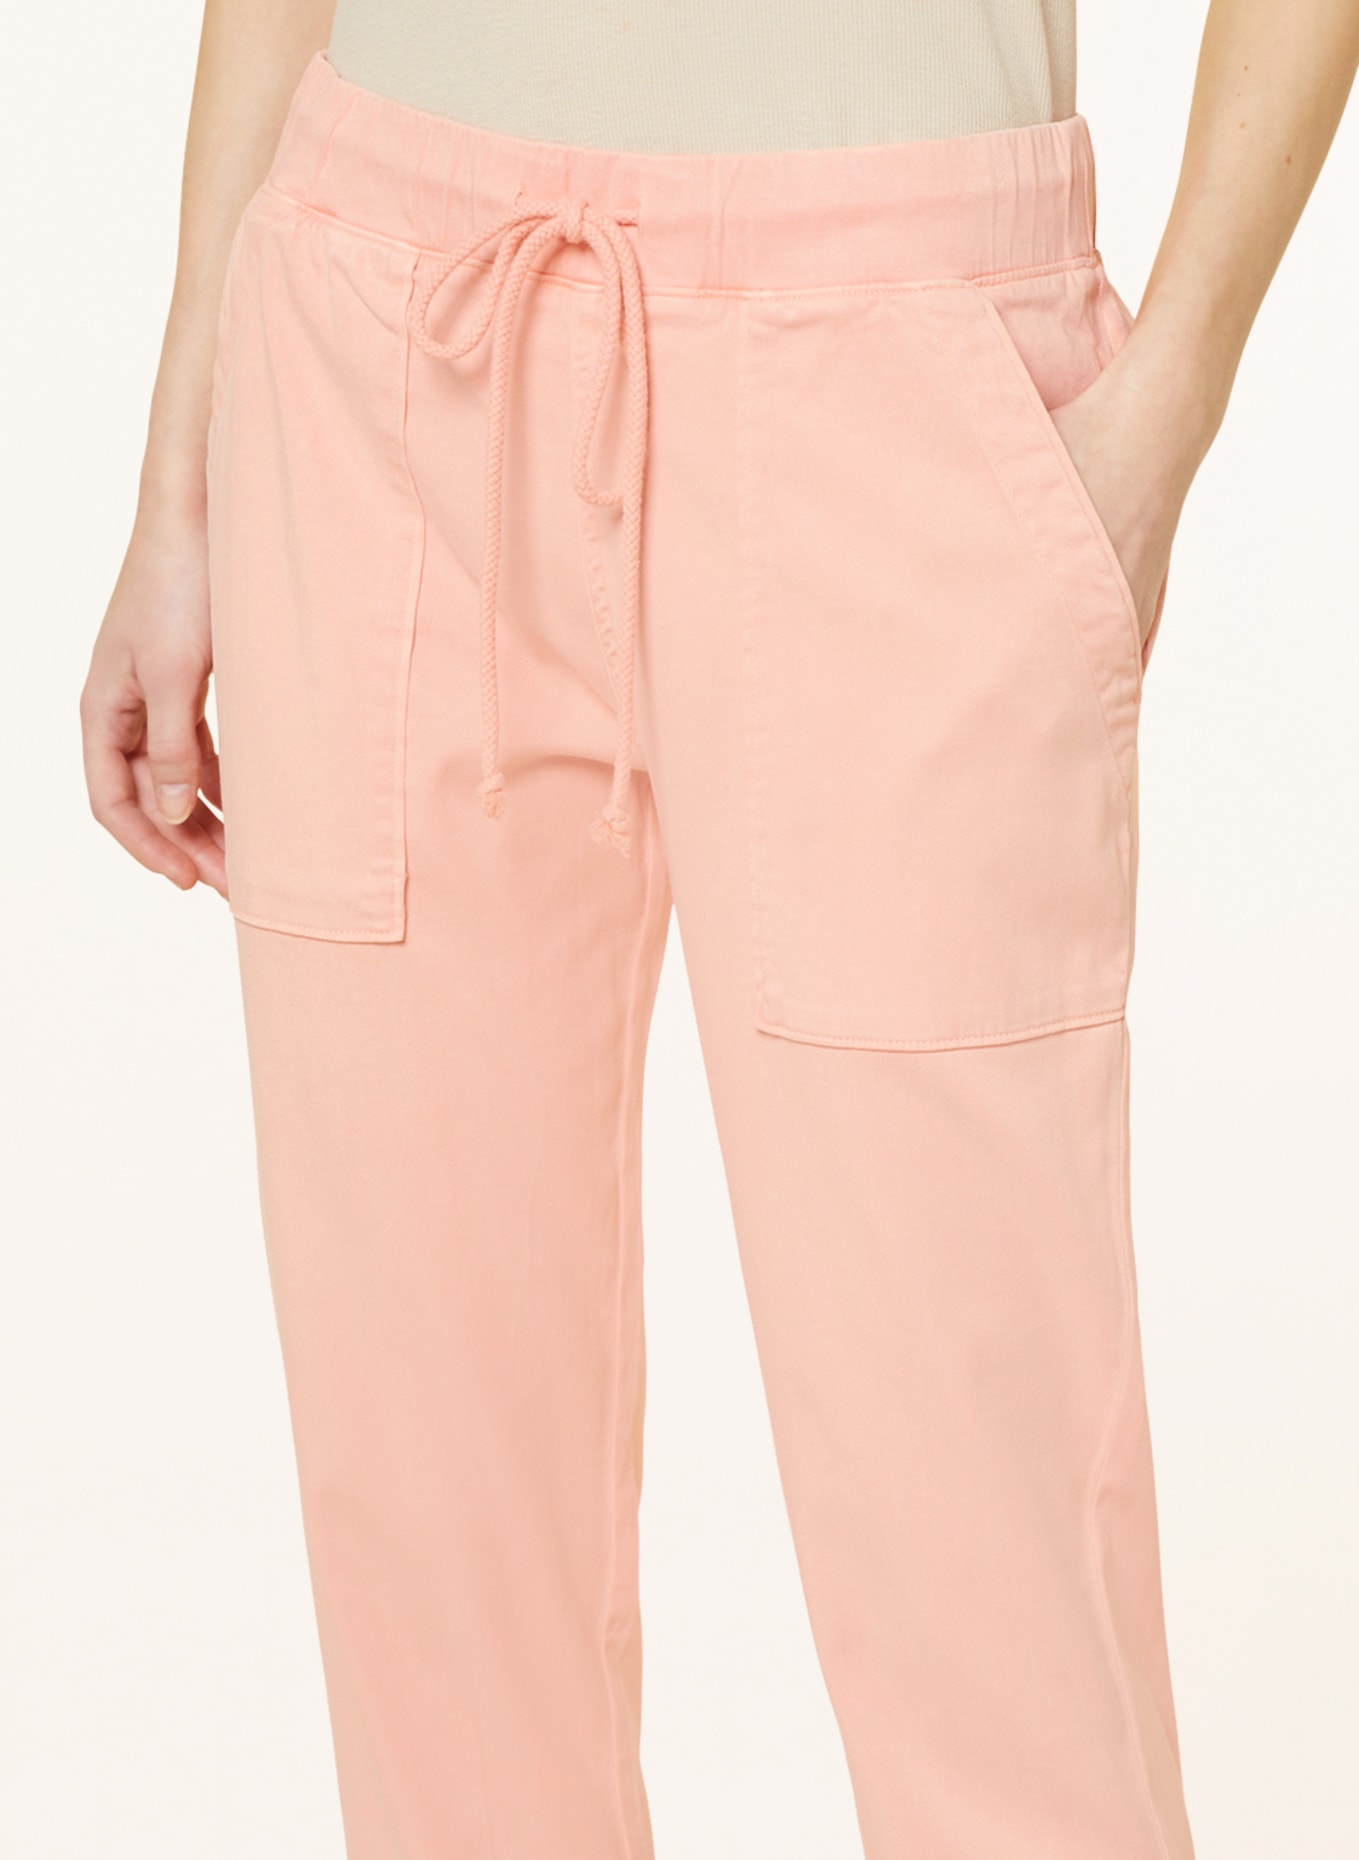 bella dahl Pants in jogger style, Color: SALMON (Image 5)